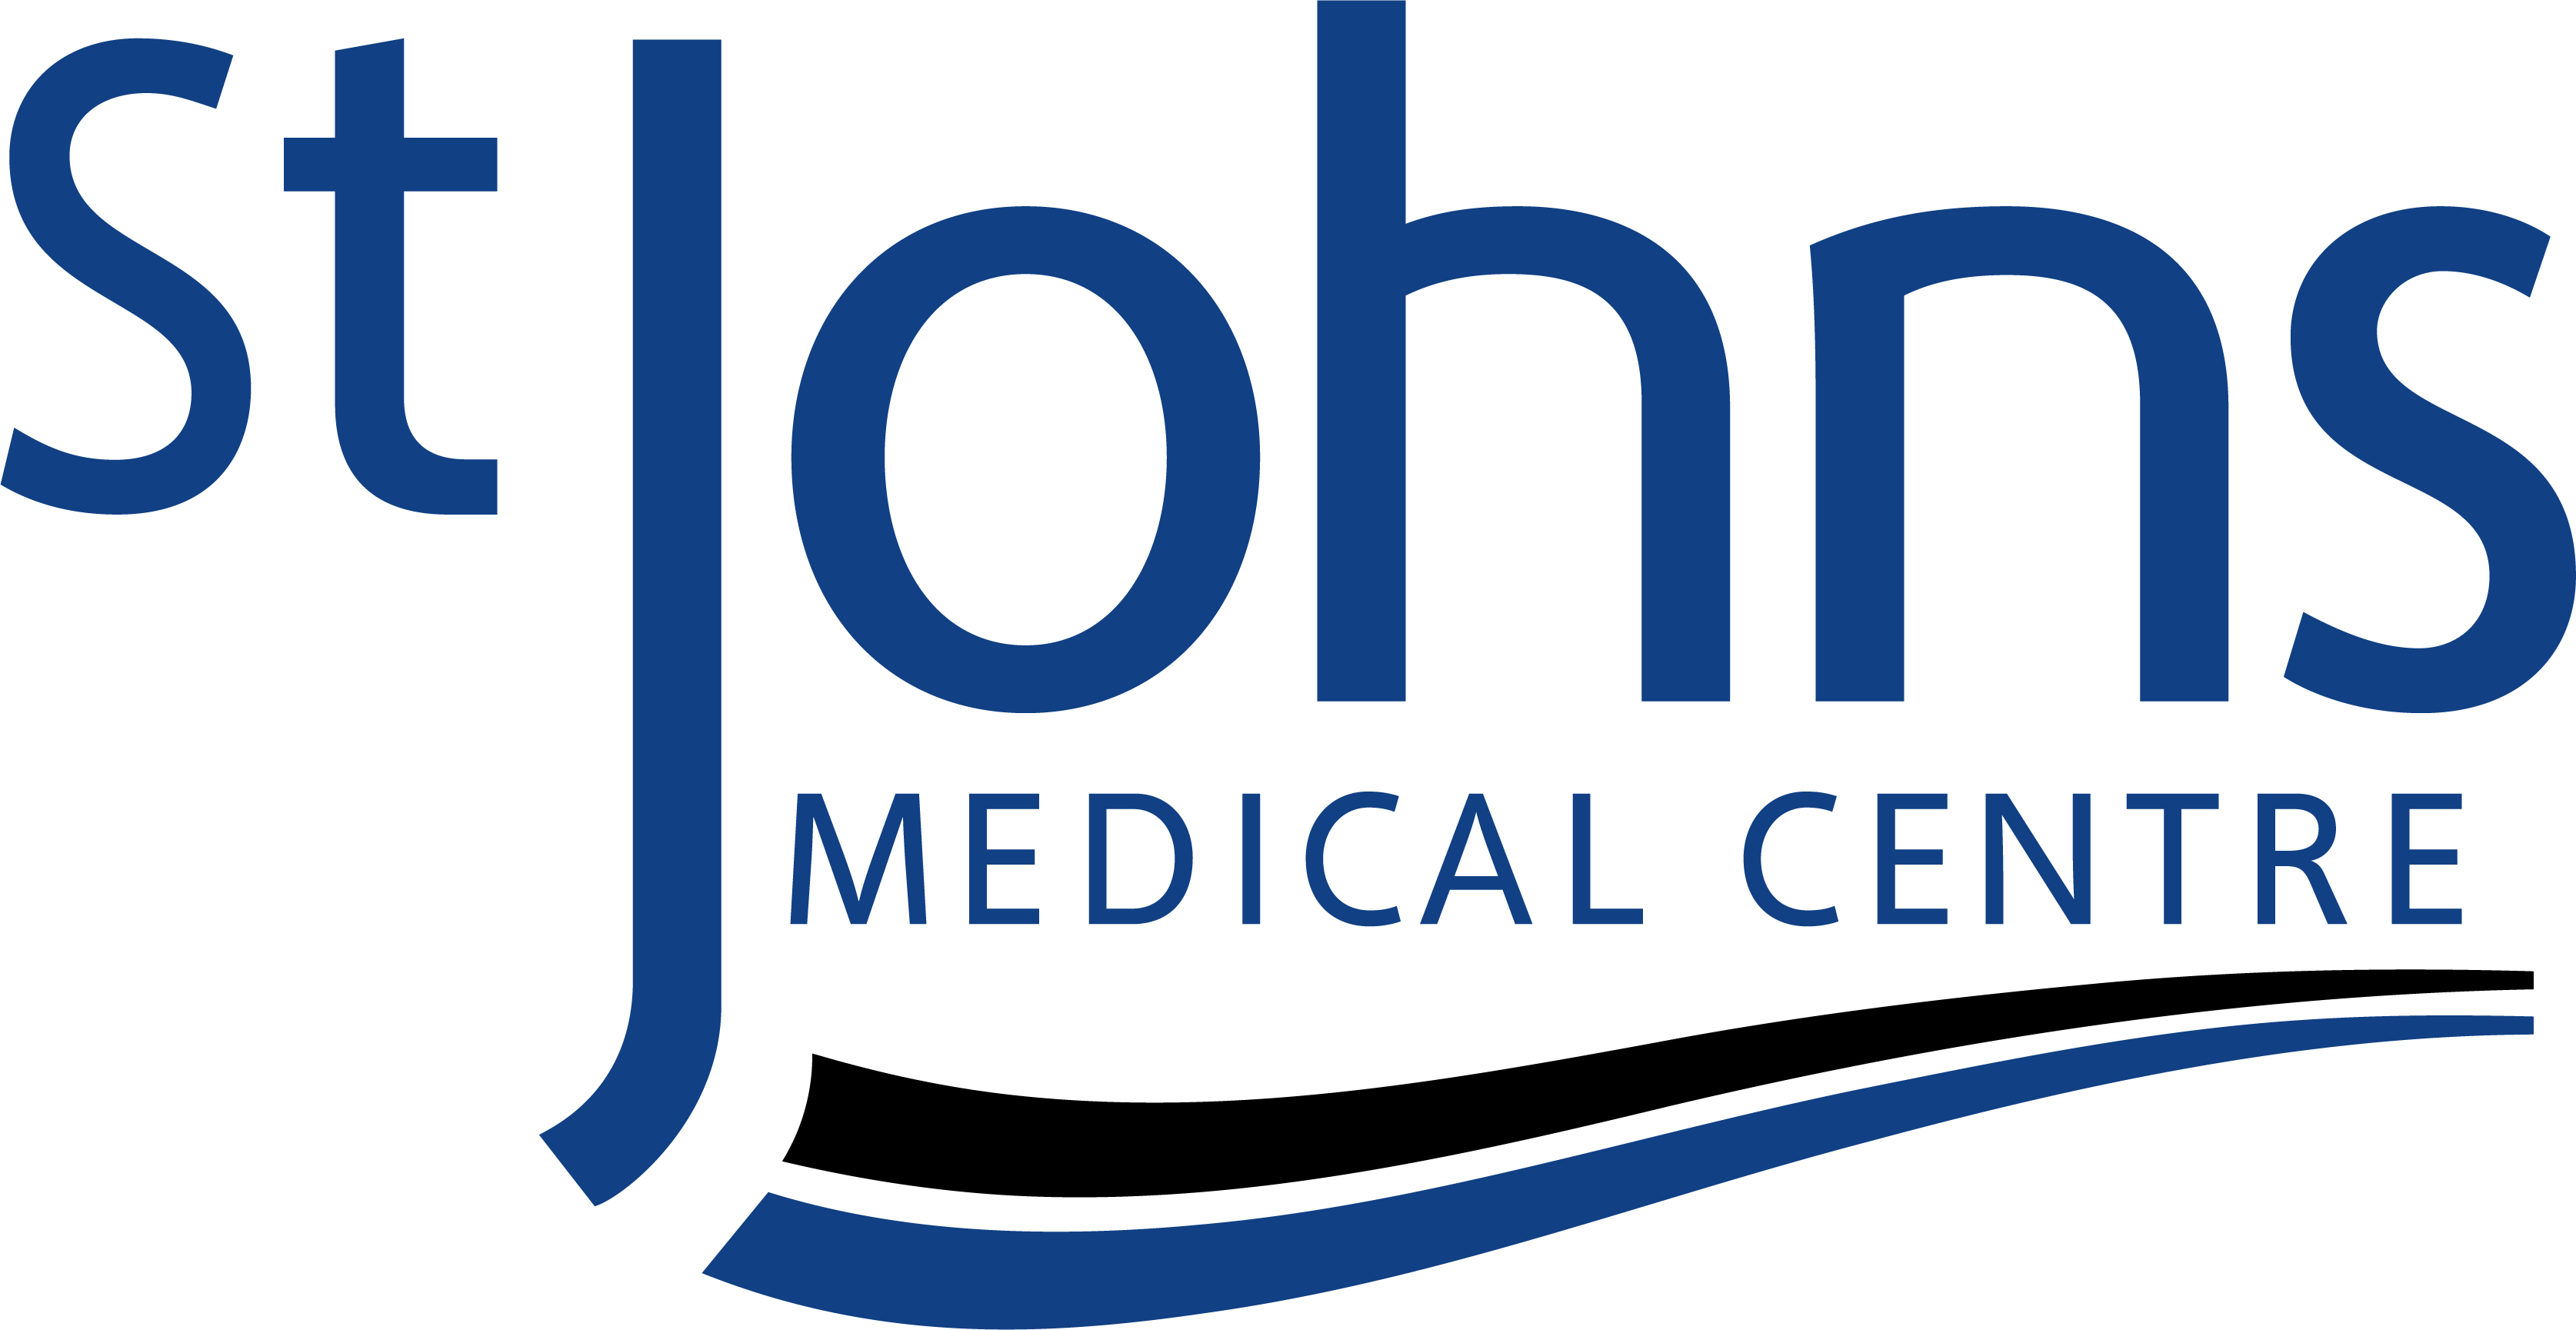 Job: Receptionist / Administrator (Clinical support team), St Johns Medical Centre